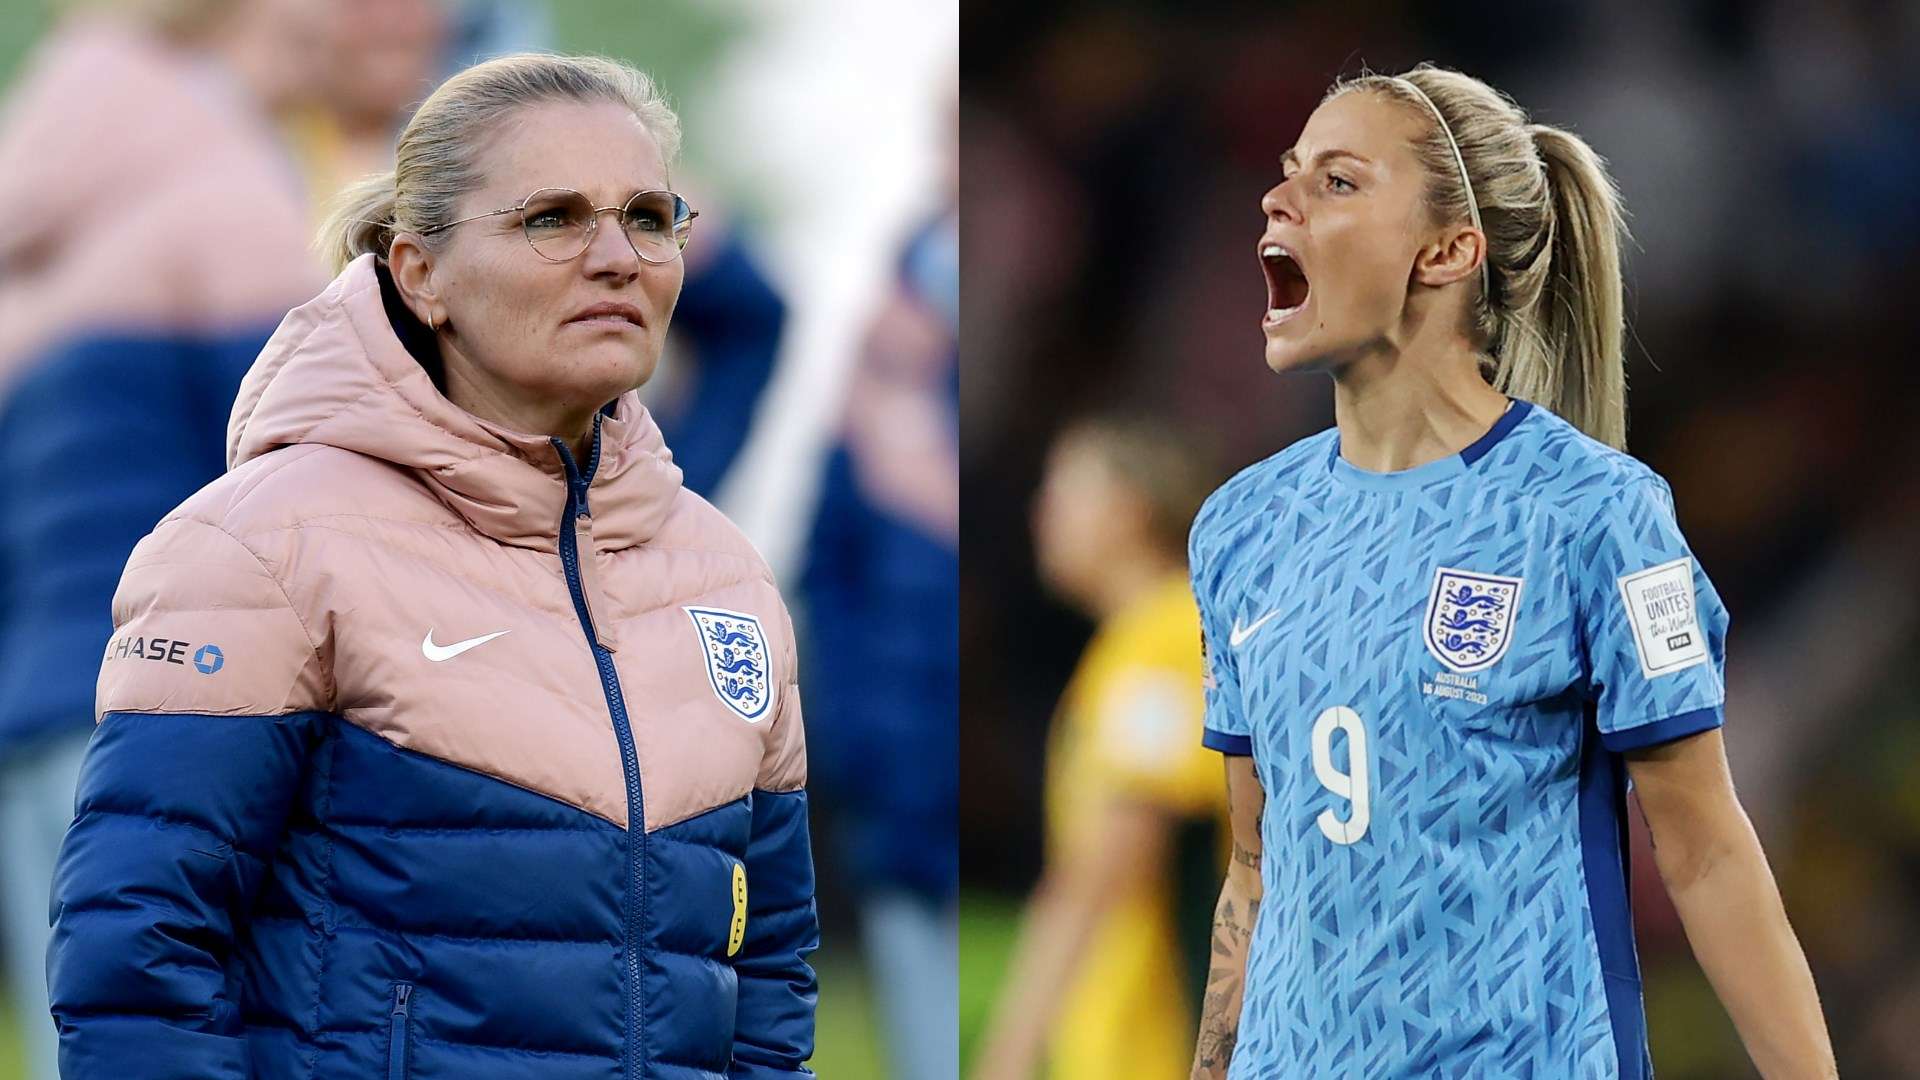 Eight games without a start - but Rachel Daly's shock England retirement 